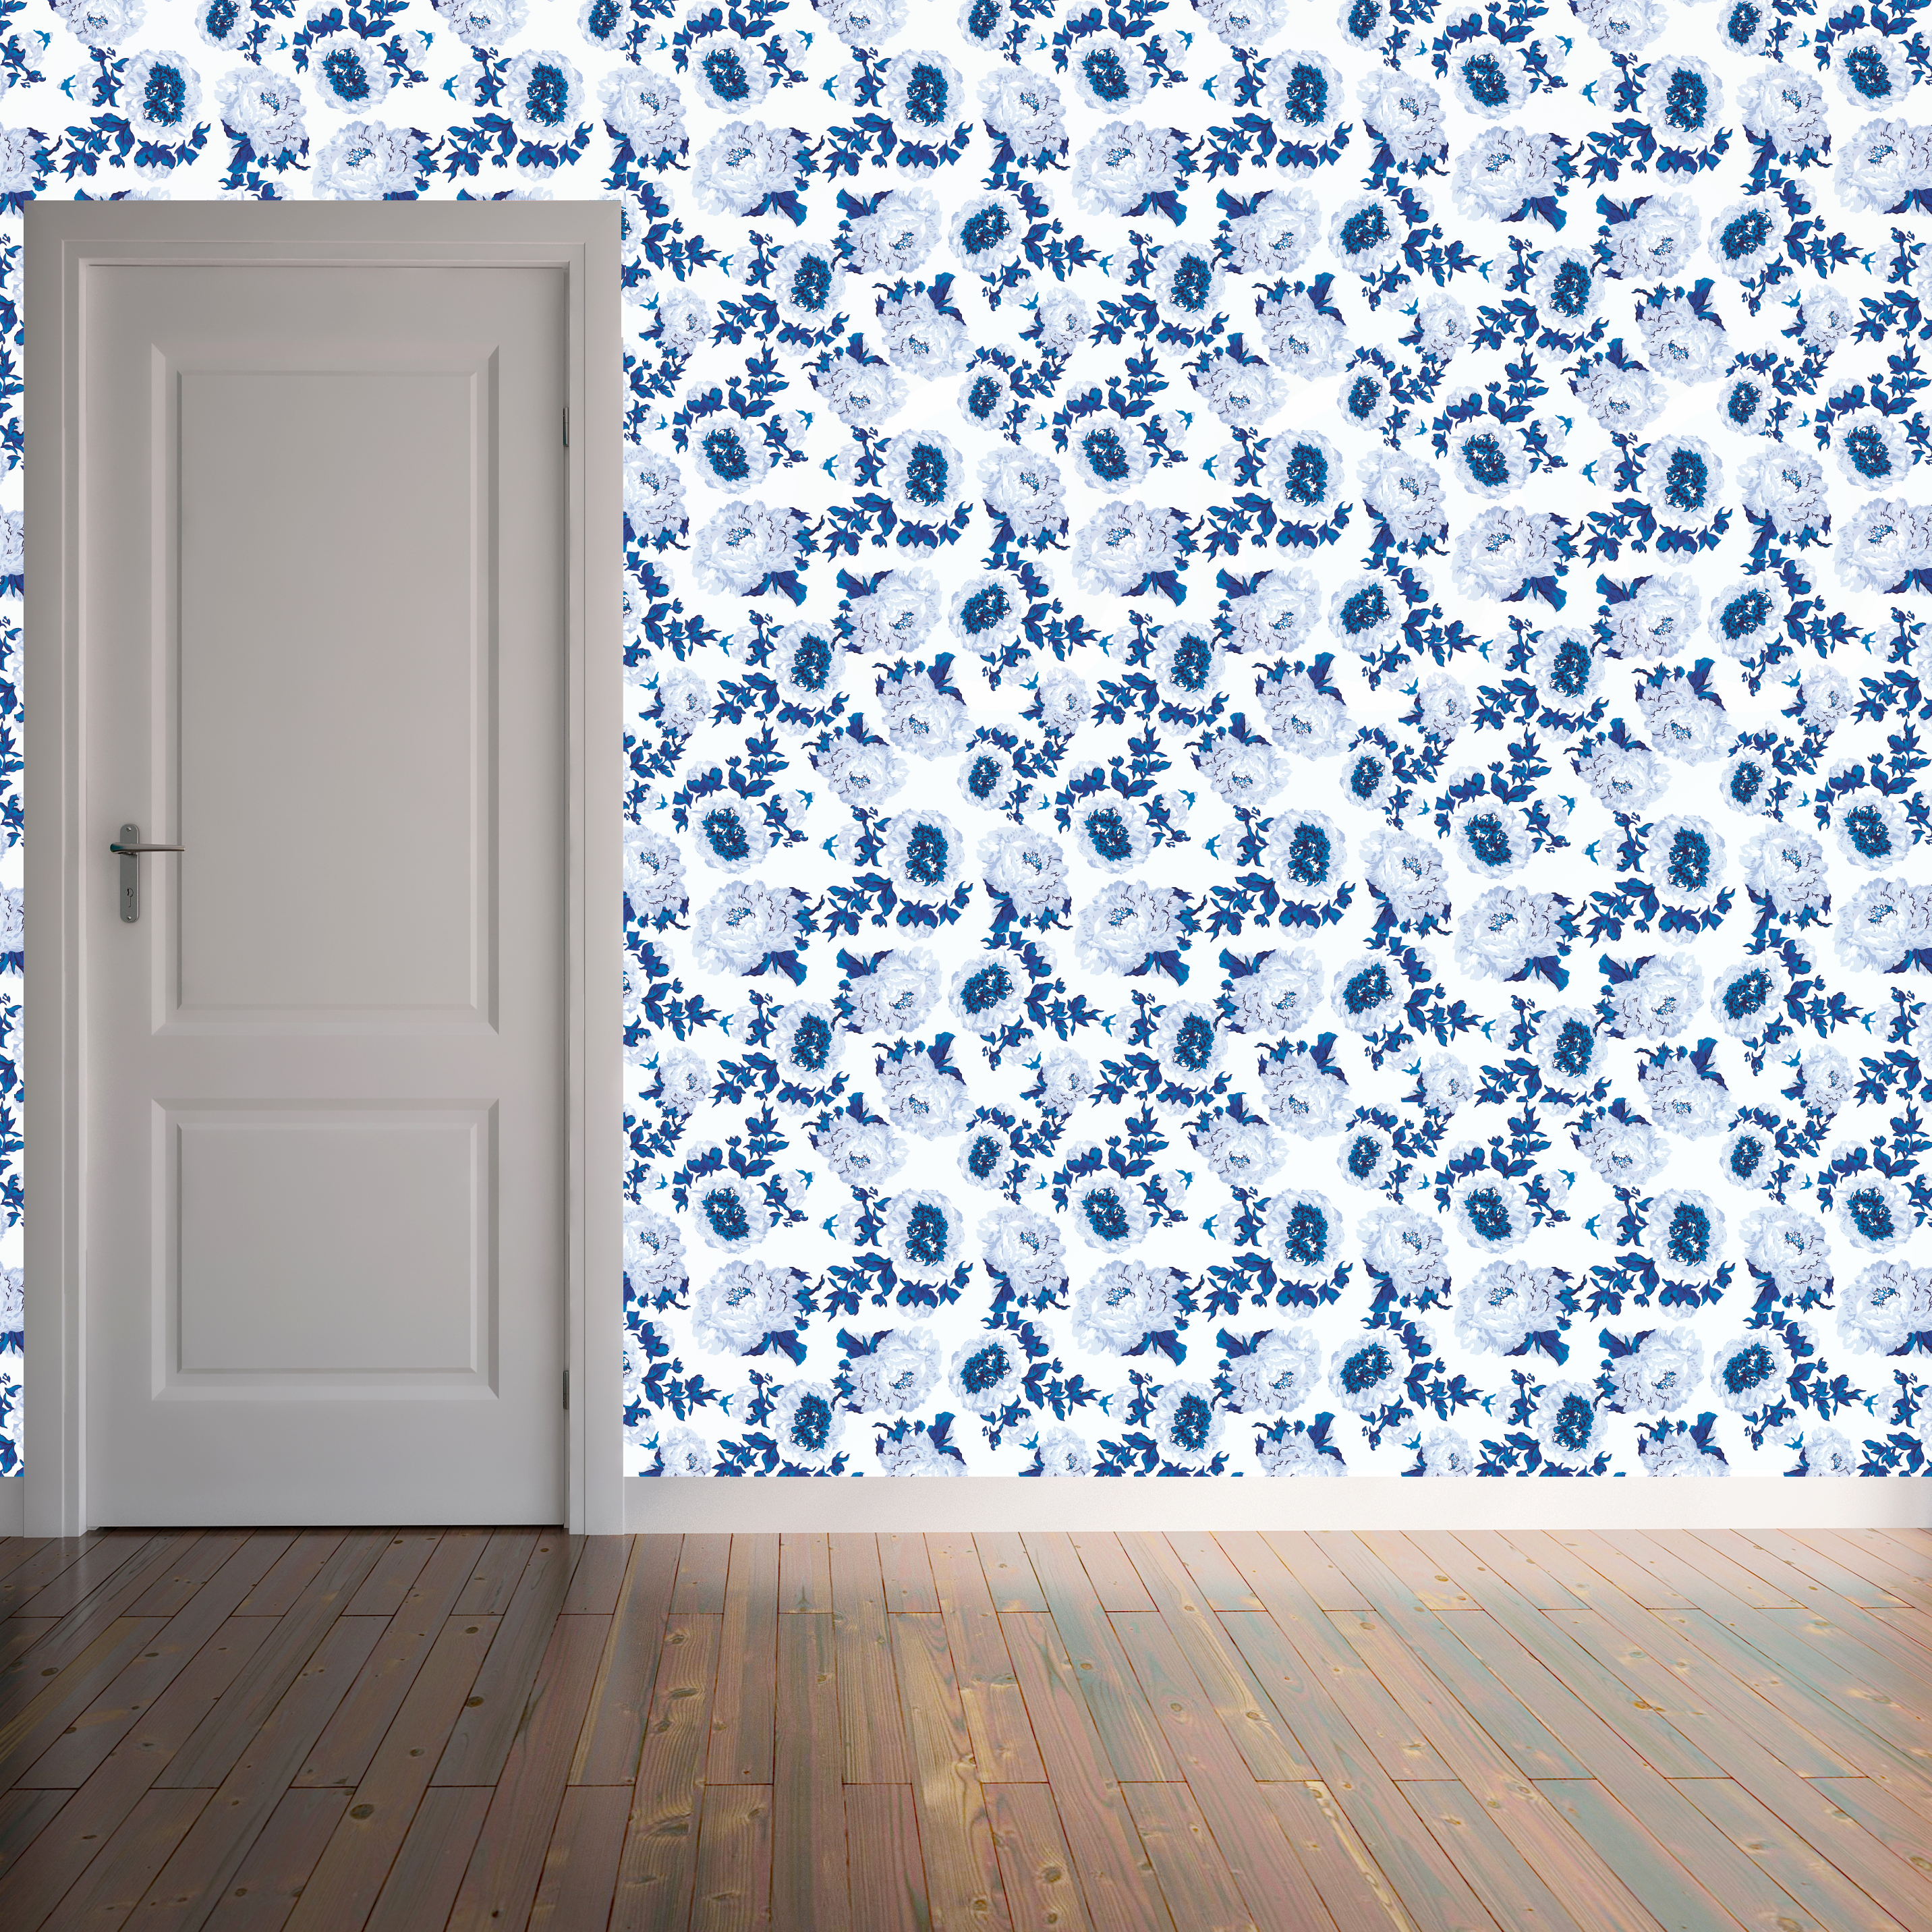 Blue Floral Wallpaper Removable Wall Stickers And Decals